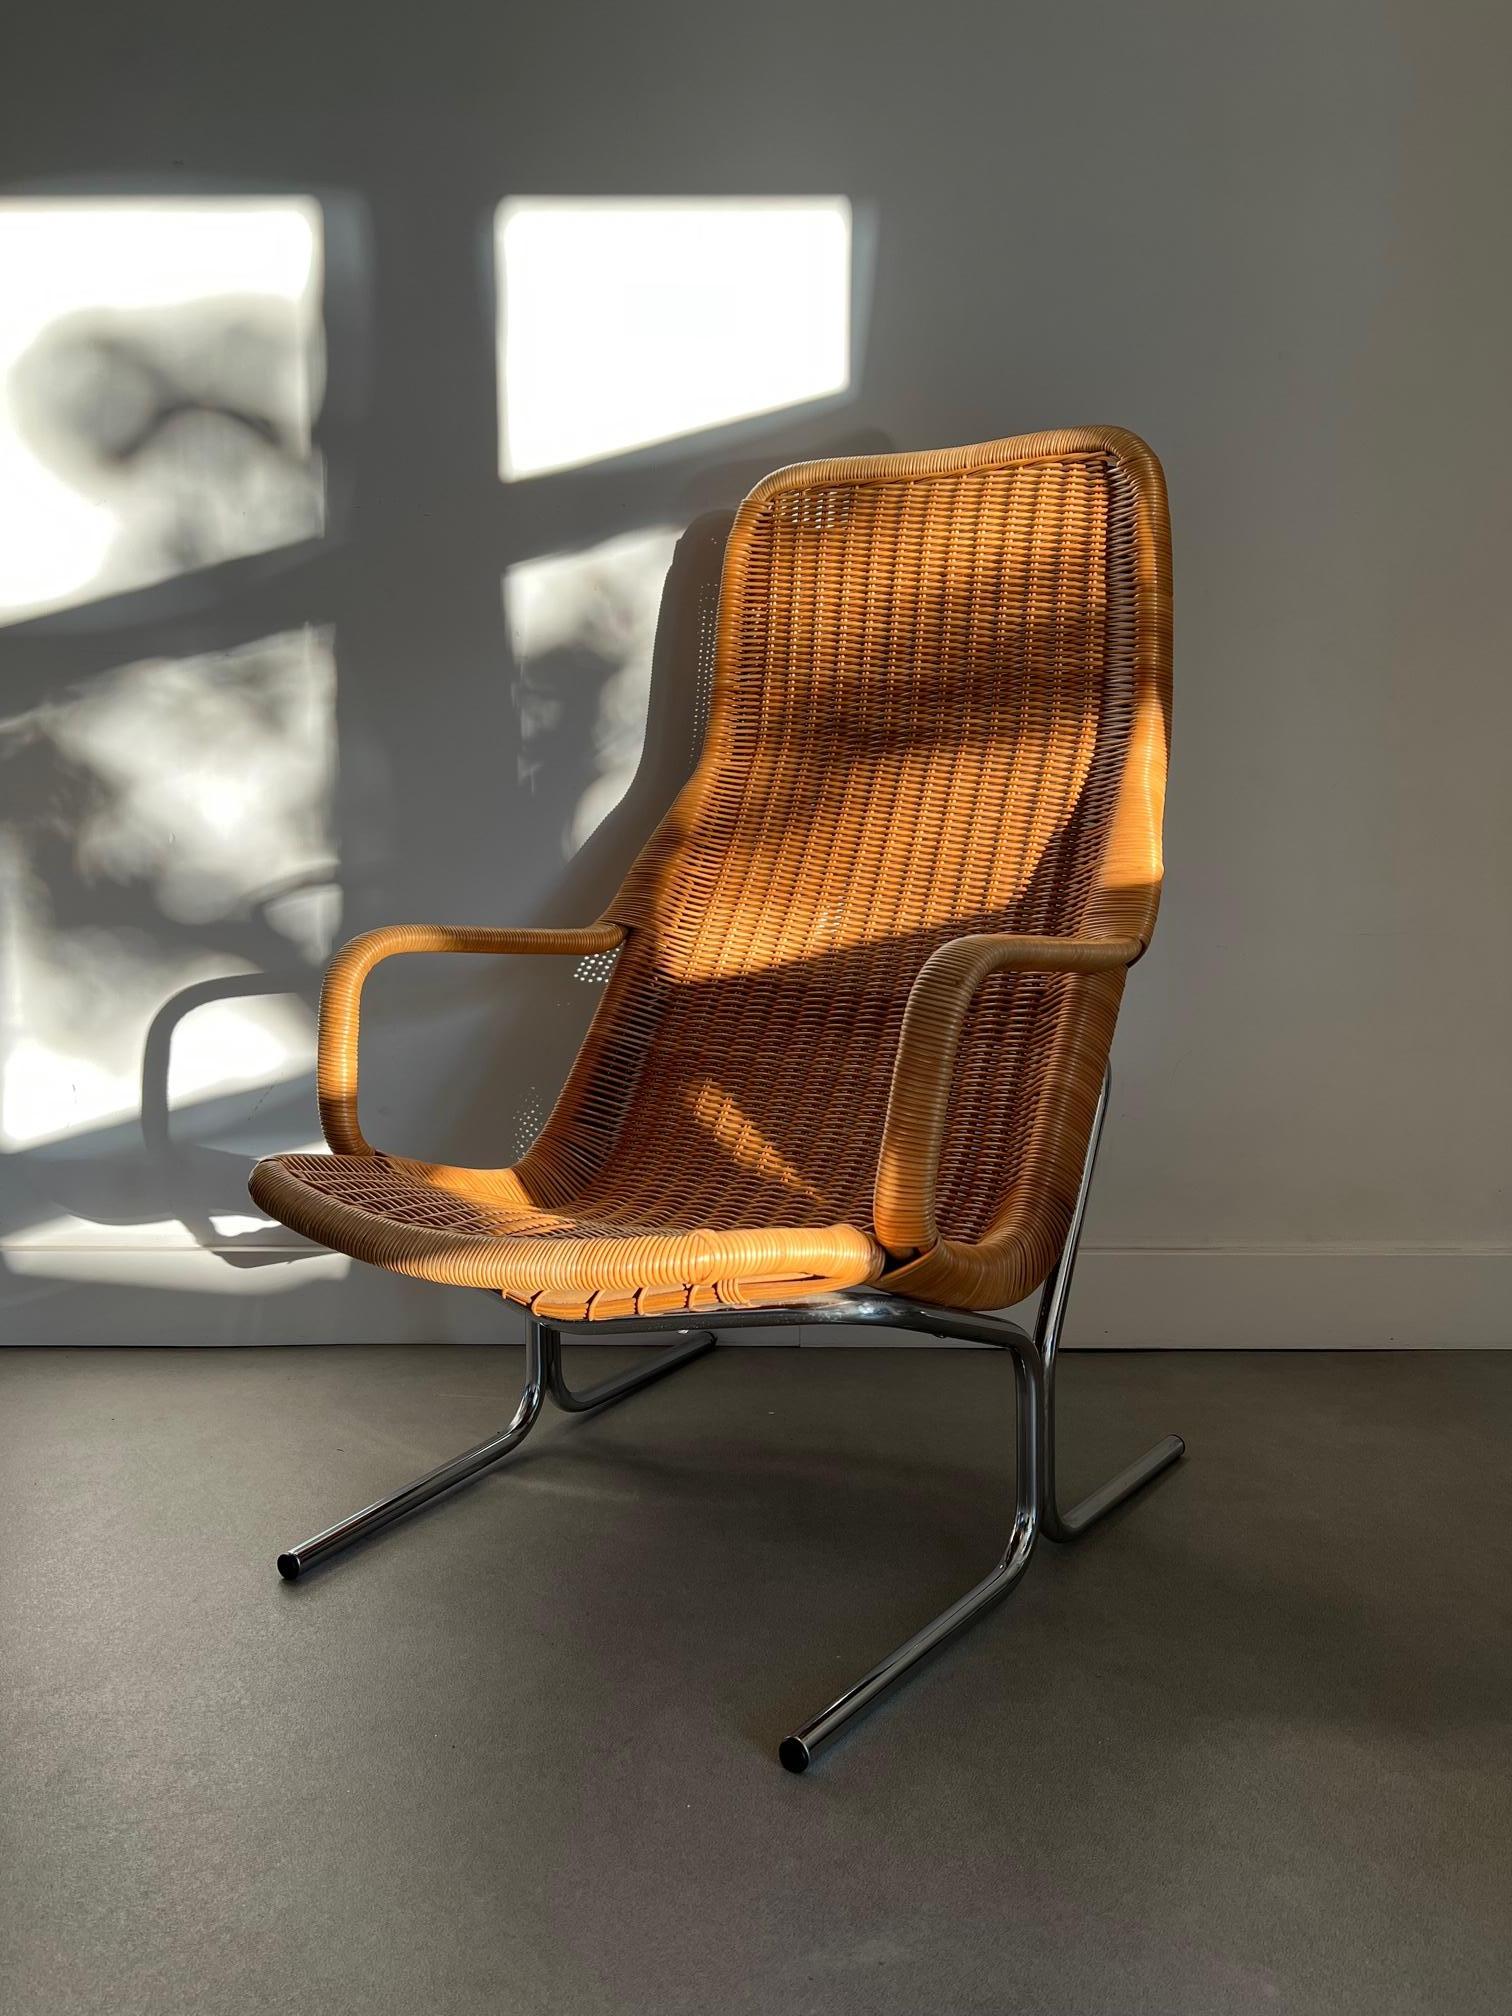 The vintage rattan lounge chair by Dirk Van Sliedrecht model 514 is a Mid-Century Modern design piece from the 1960s. Dirk Van Sliedrecht was a Dutch furniture designer and manufacturer who was known for his innovative use of materials, particularly